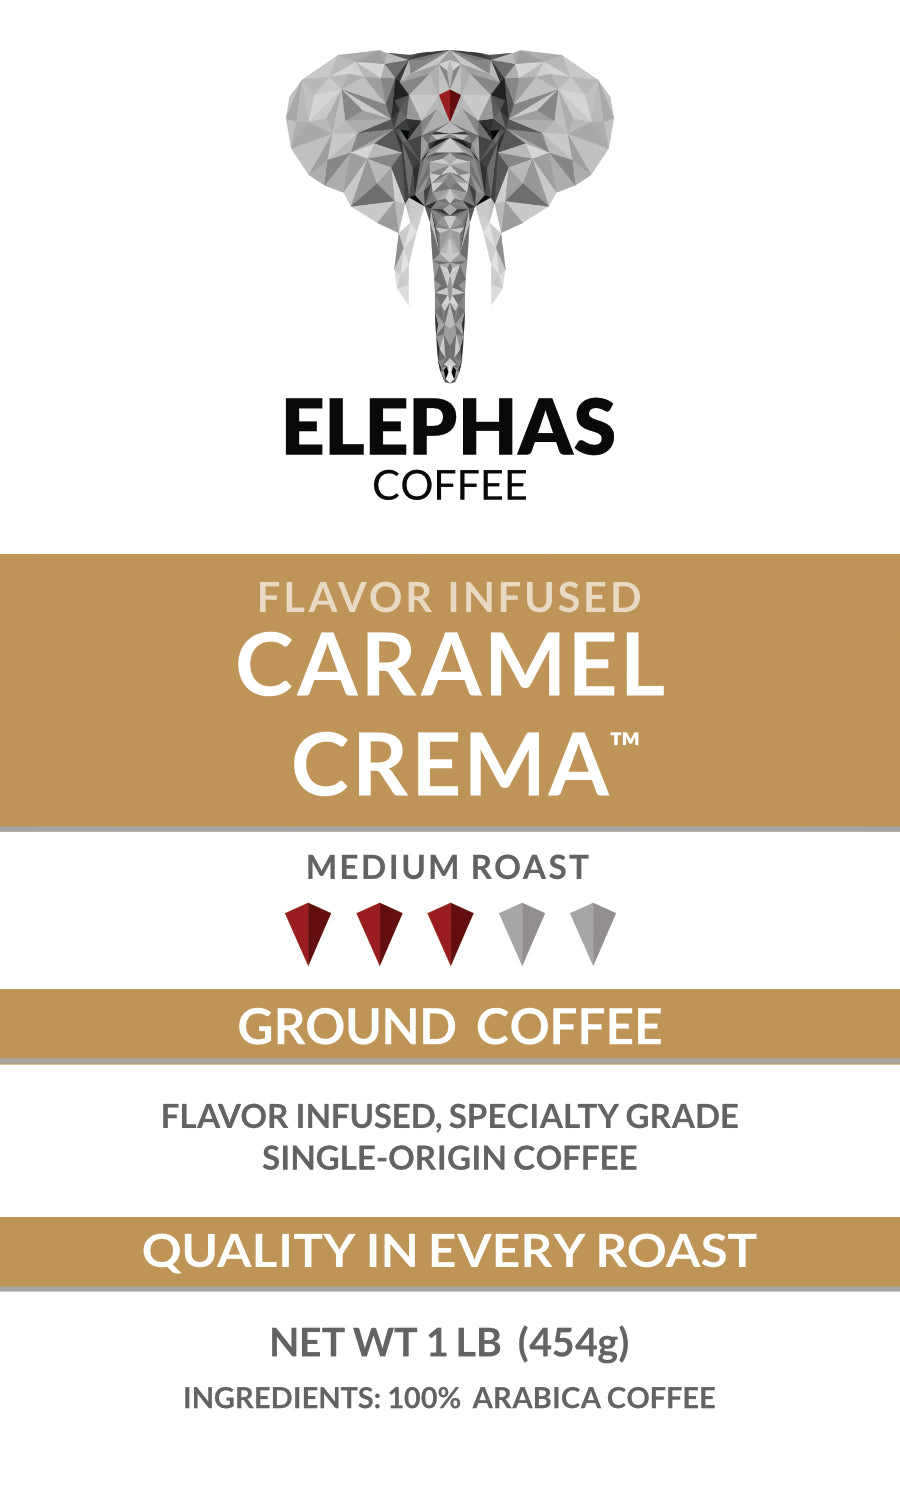 Caramel Crema Flavor Infused Specialty Coffee from Elephas Coffee